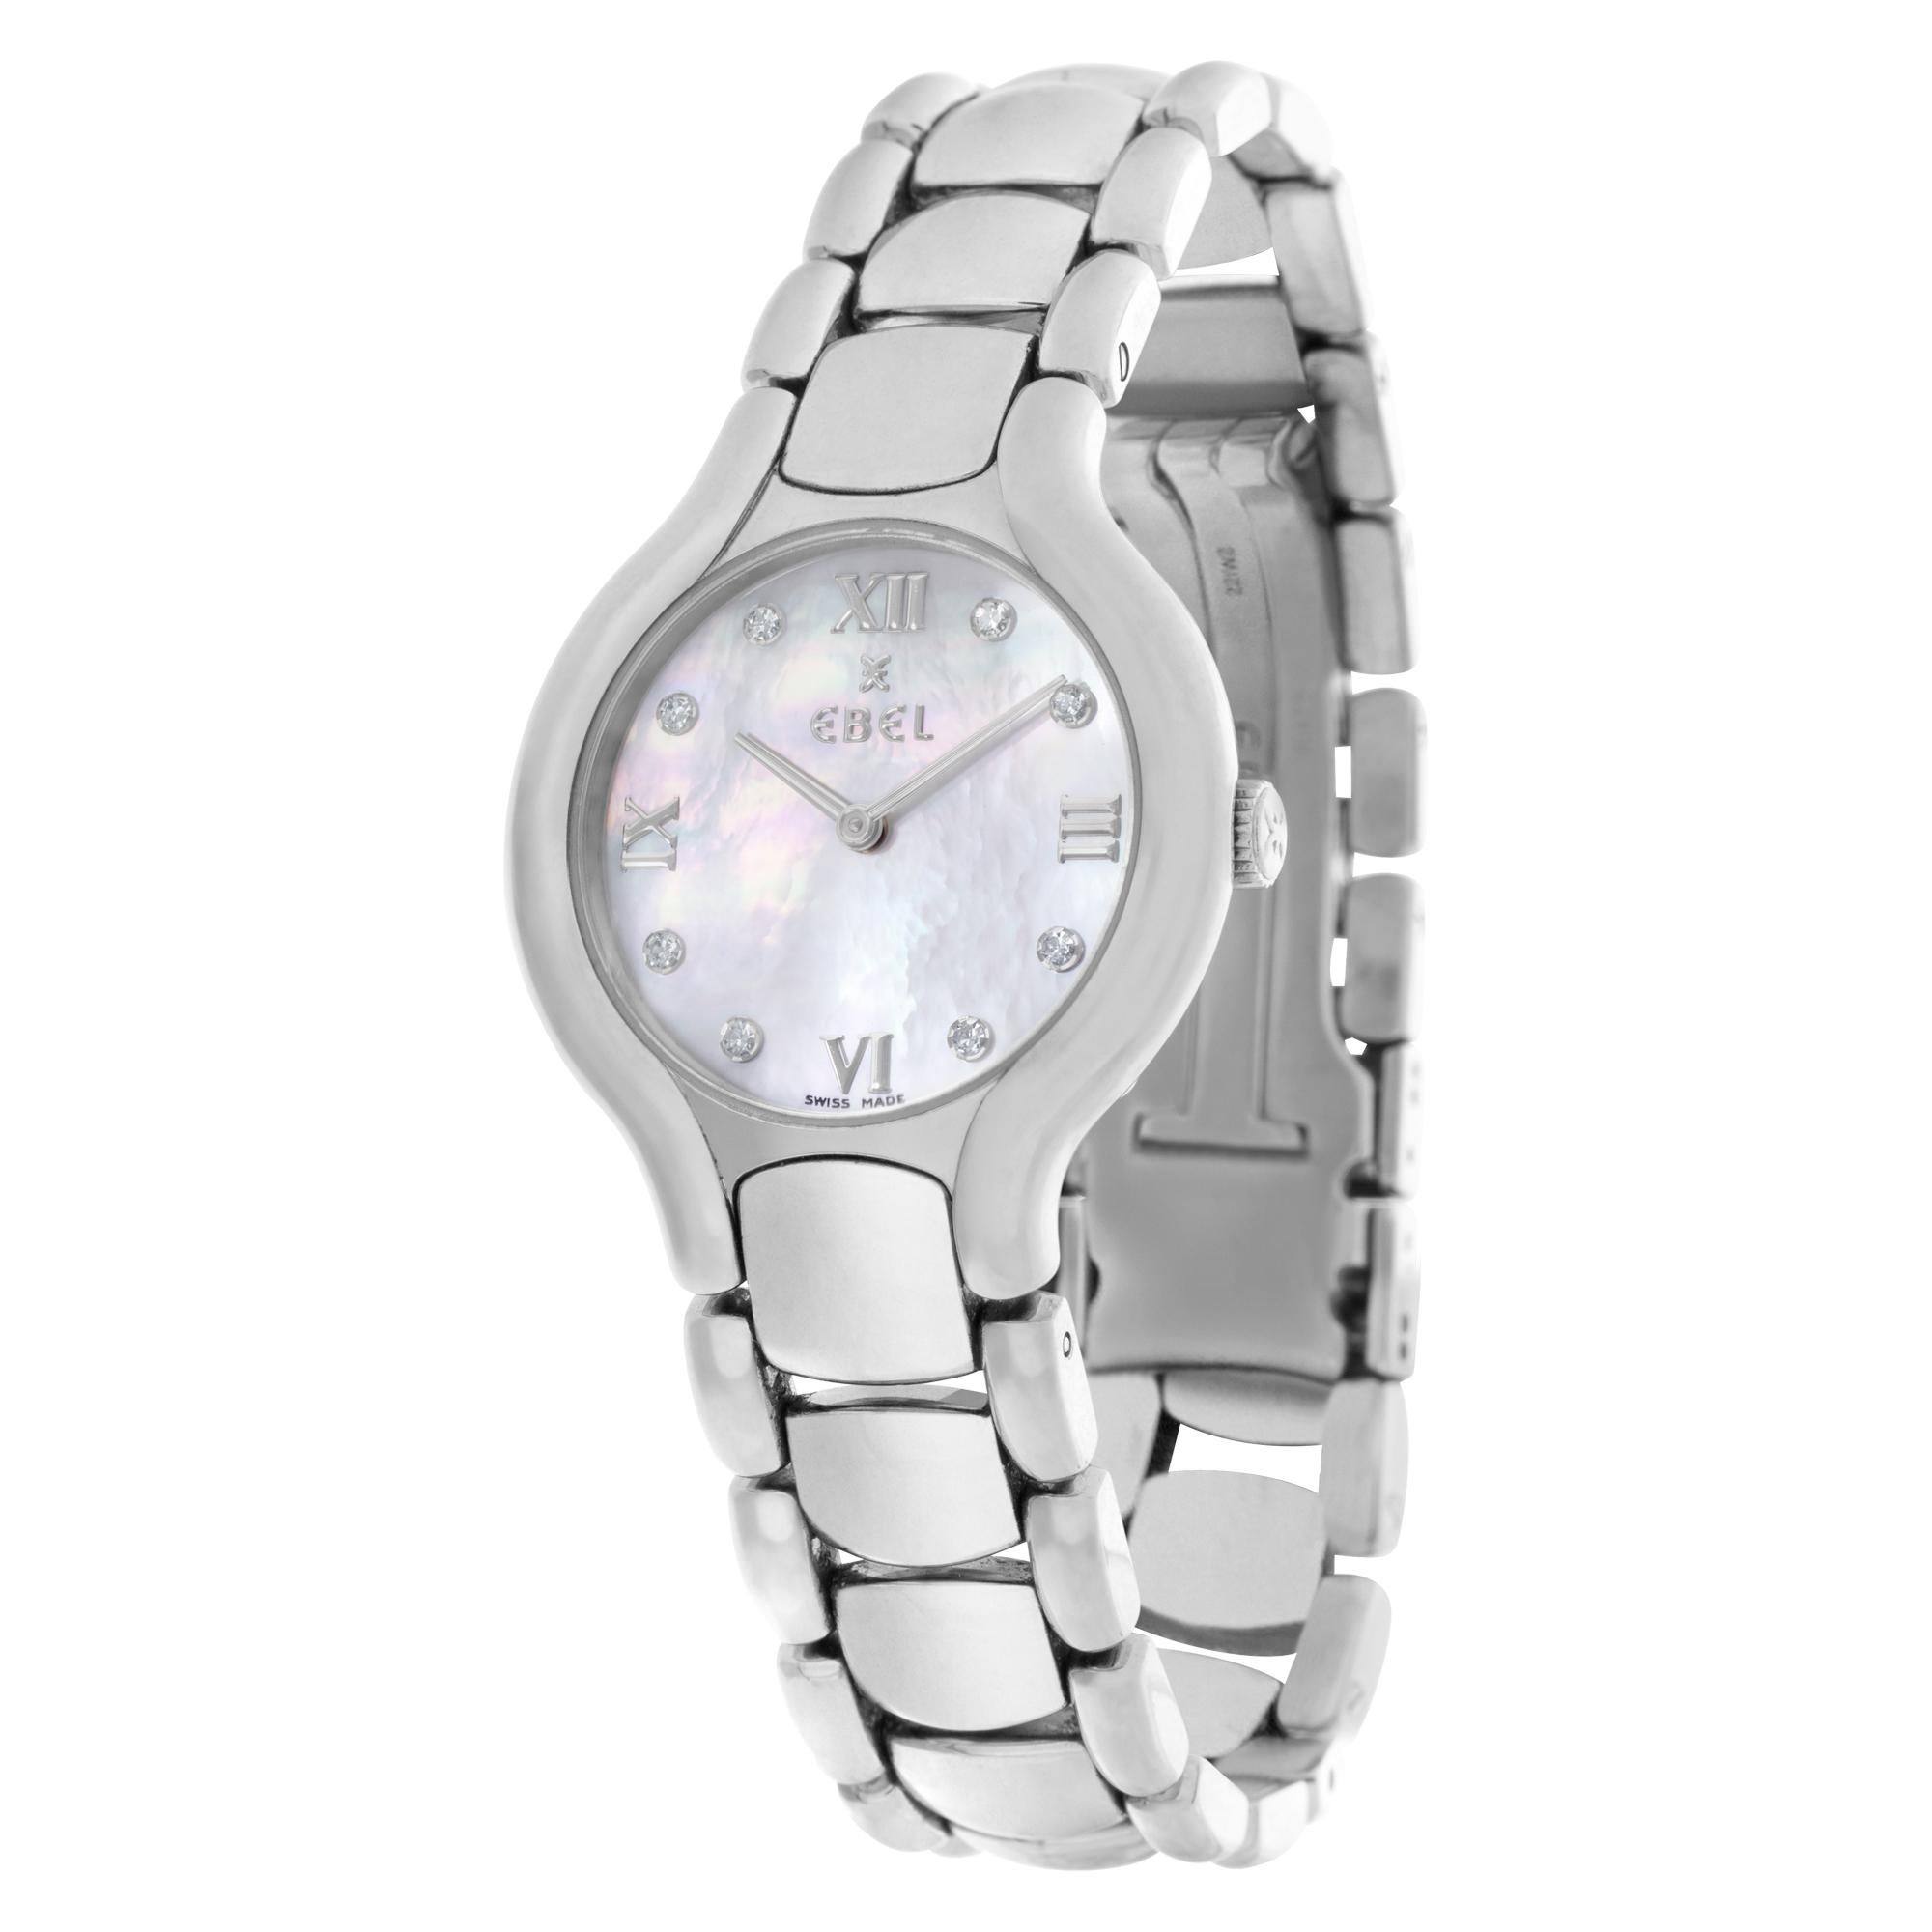 Ebel Beluga with Mother of Pearl diamond dial in stainless steel. Quartz. 28 mm case size. Ref E9157421. Circa 2000s. Fine Pre-owned Ebel Watch.

Certified preowned Classic Ebel Beluga E9157421 watch is made out of Stainless steel on a Stainless